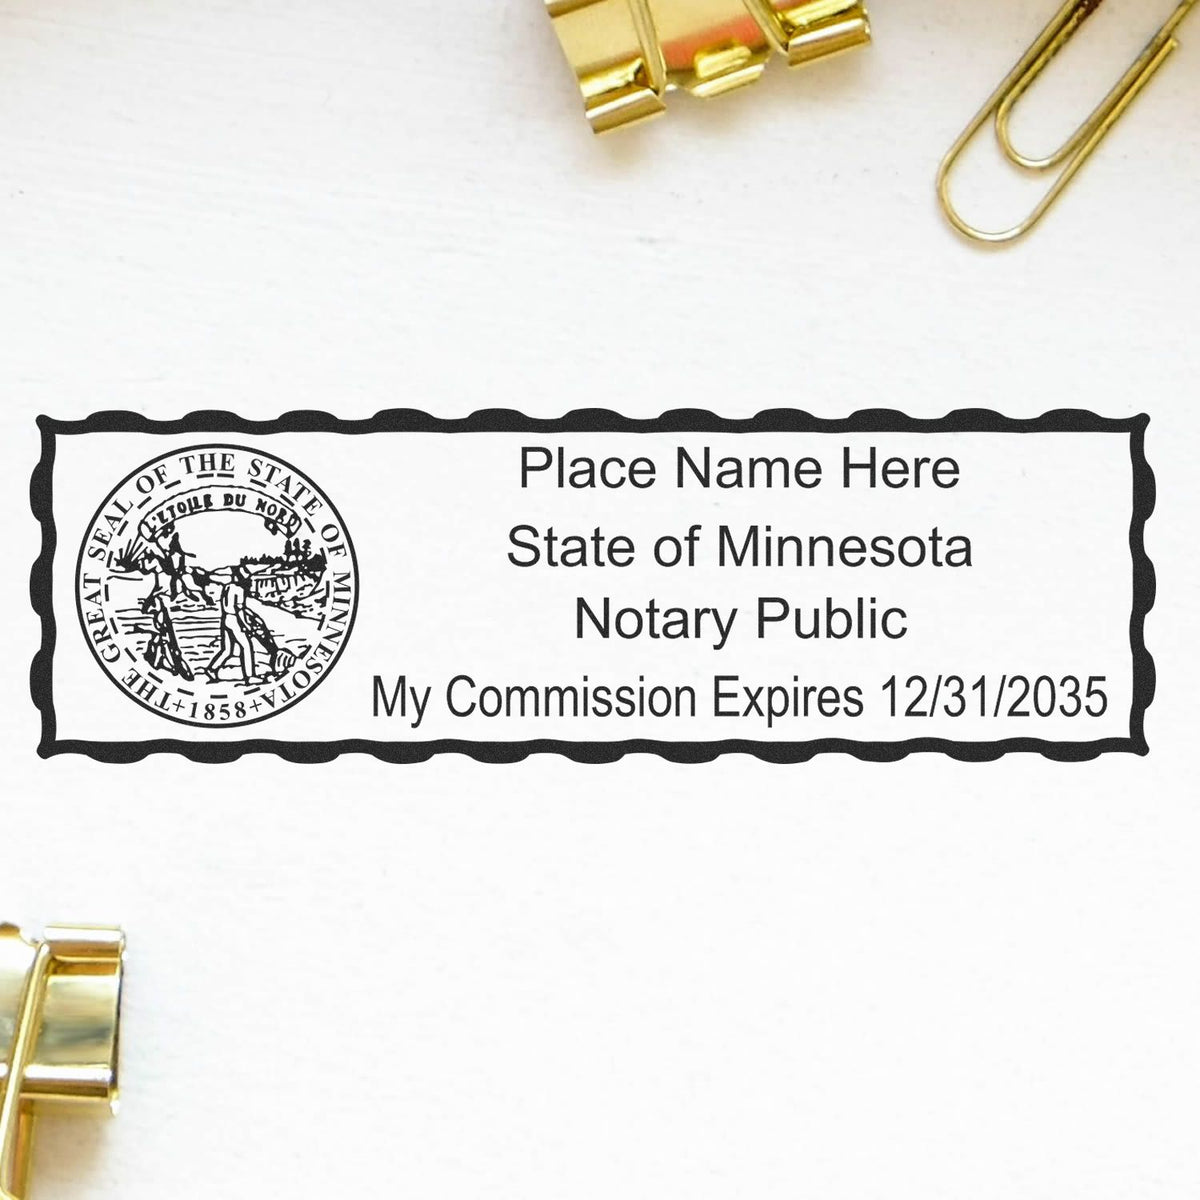 A photograph of the MaxLight Premium Pre-Inked Minnesota State Seal Notarial Stamp stamp impression reveals a vivid, professional image of the on paper.